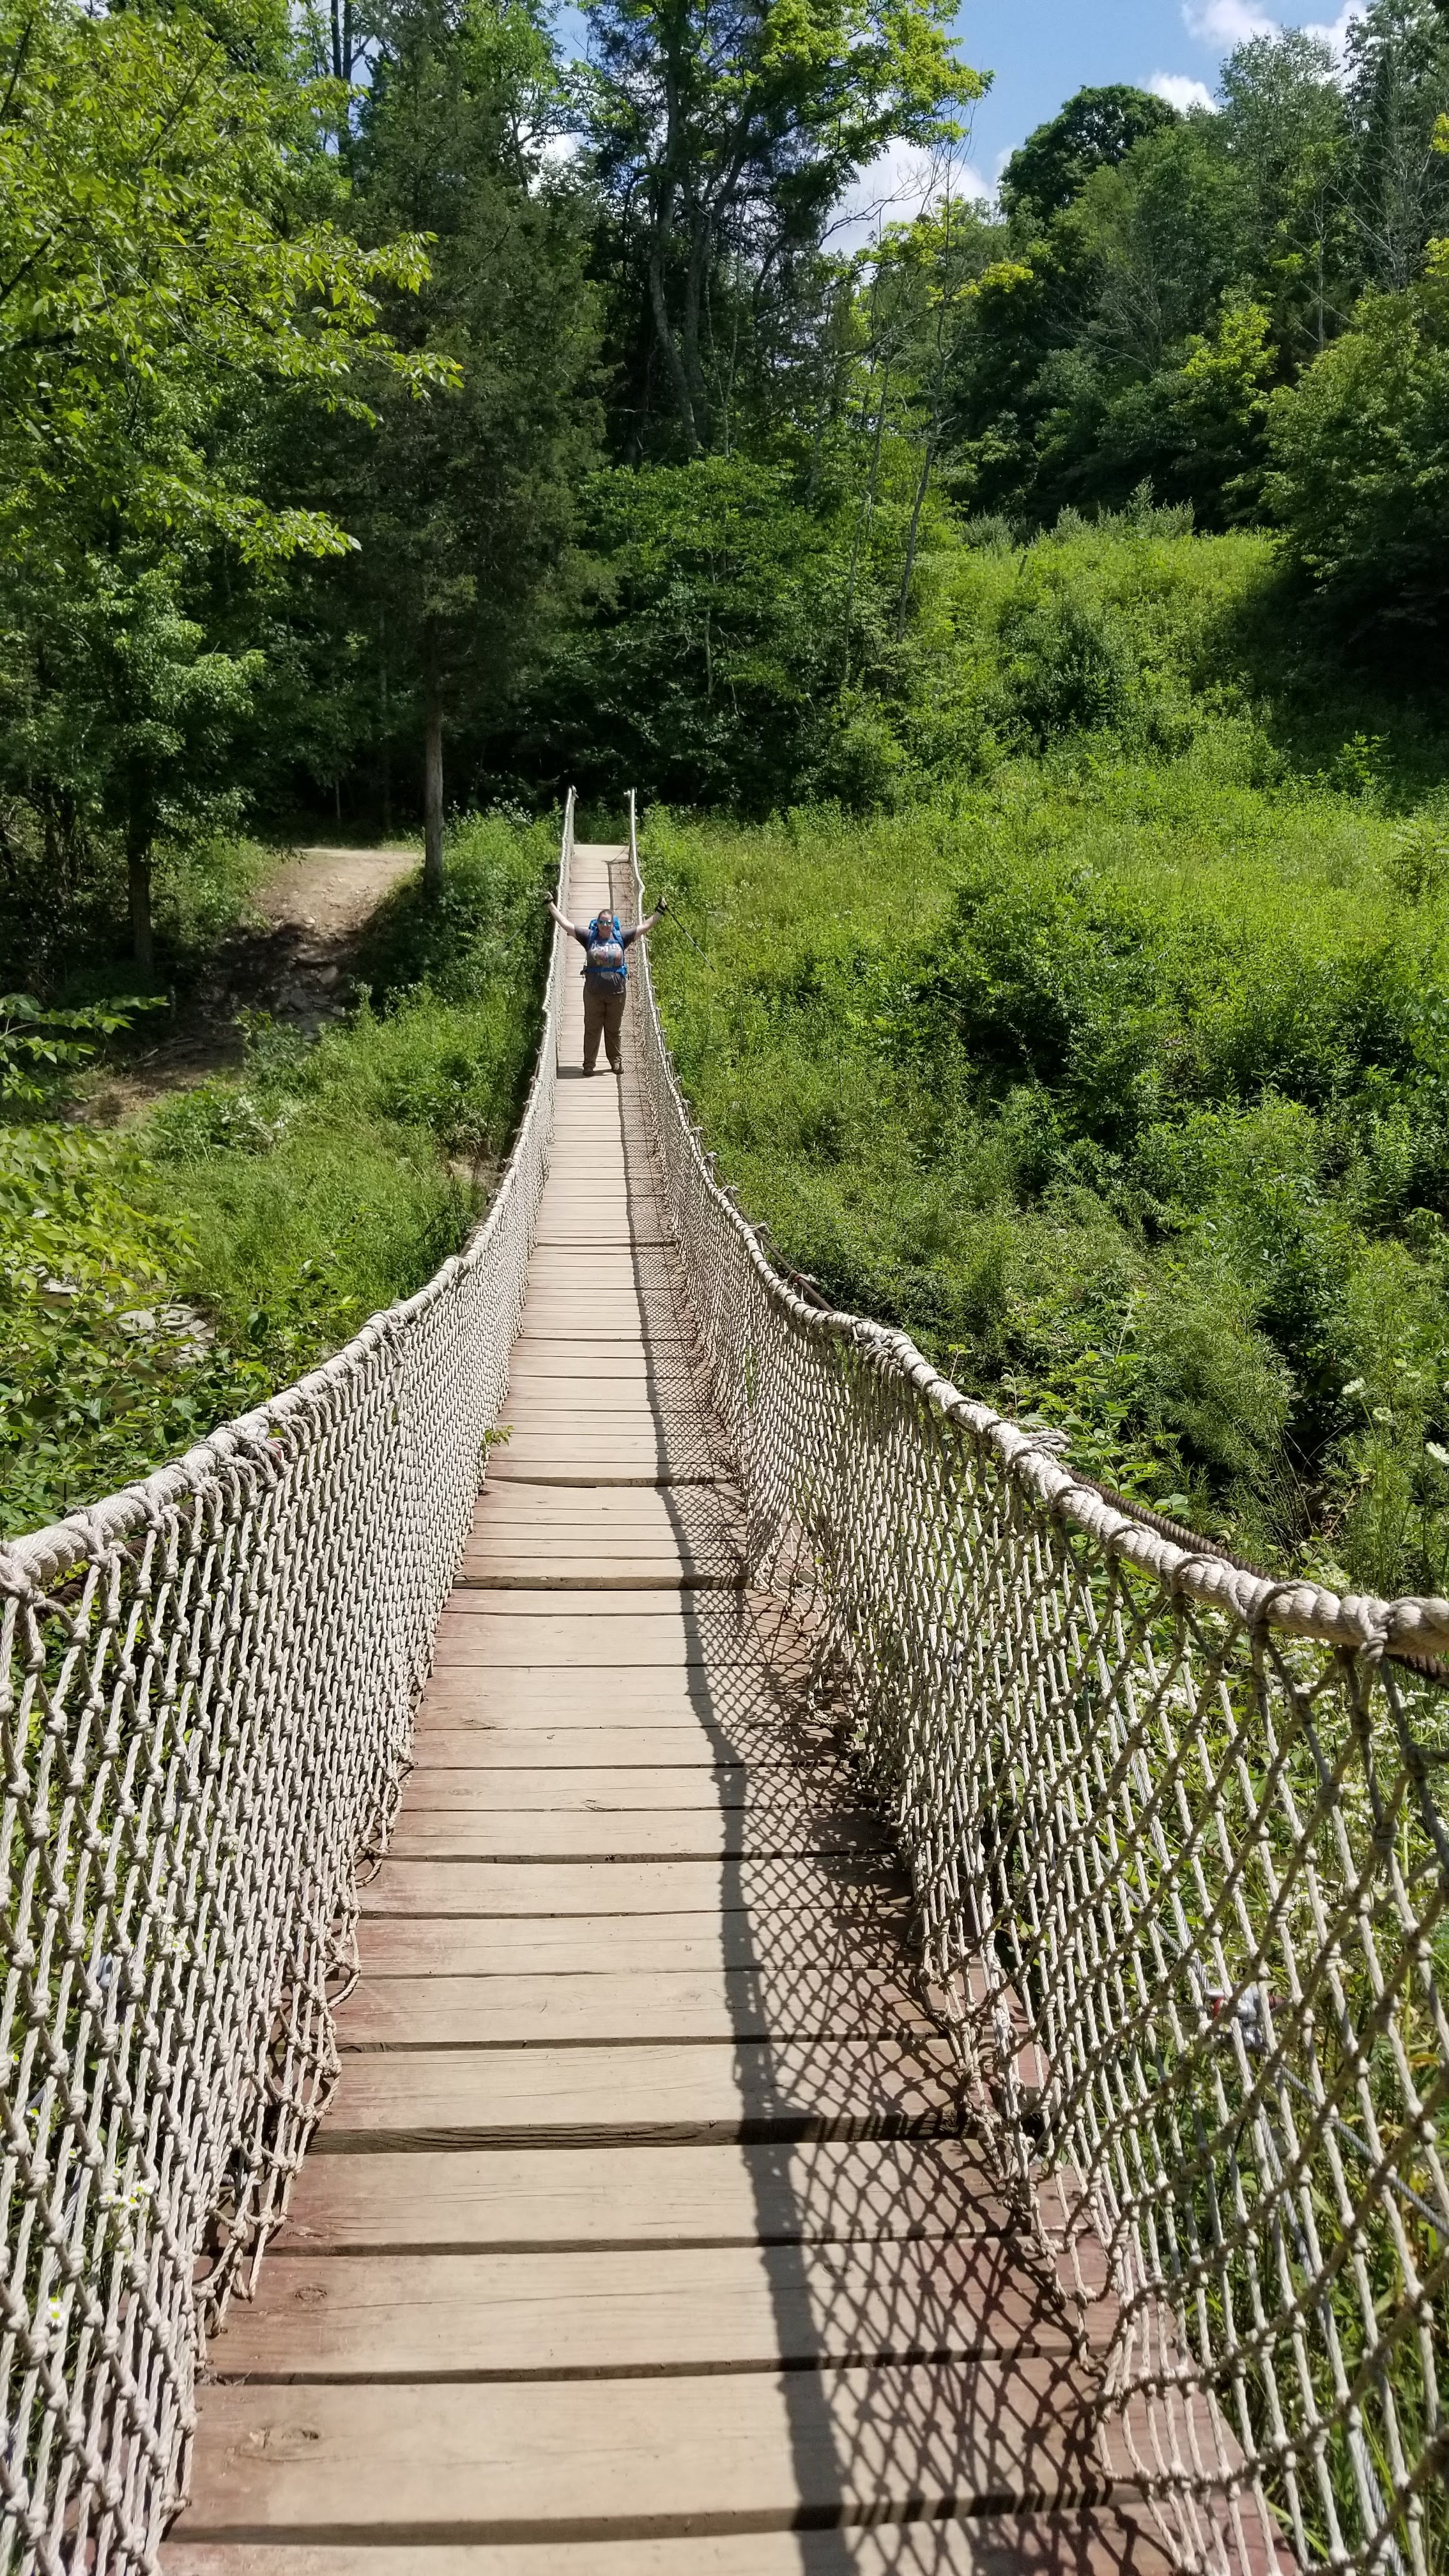 swinging bridge on the yellow trail - just reopened in 2015